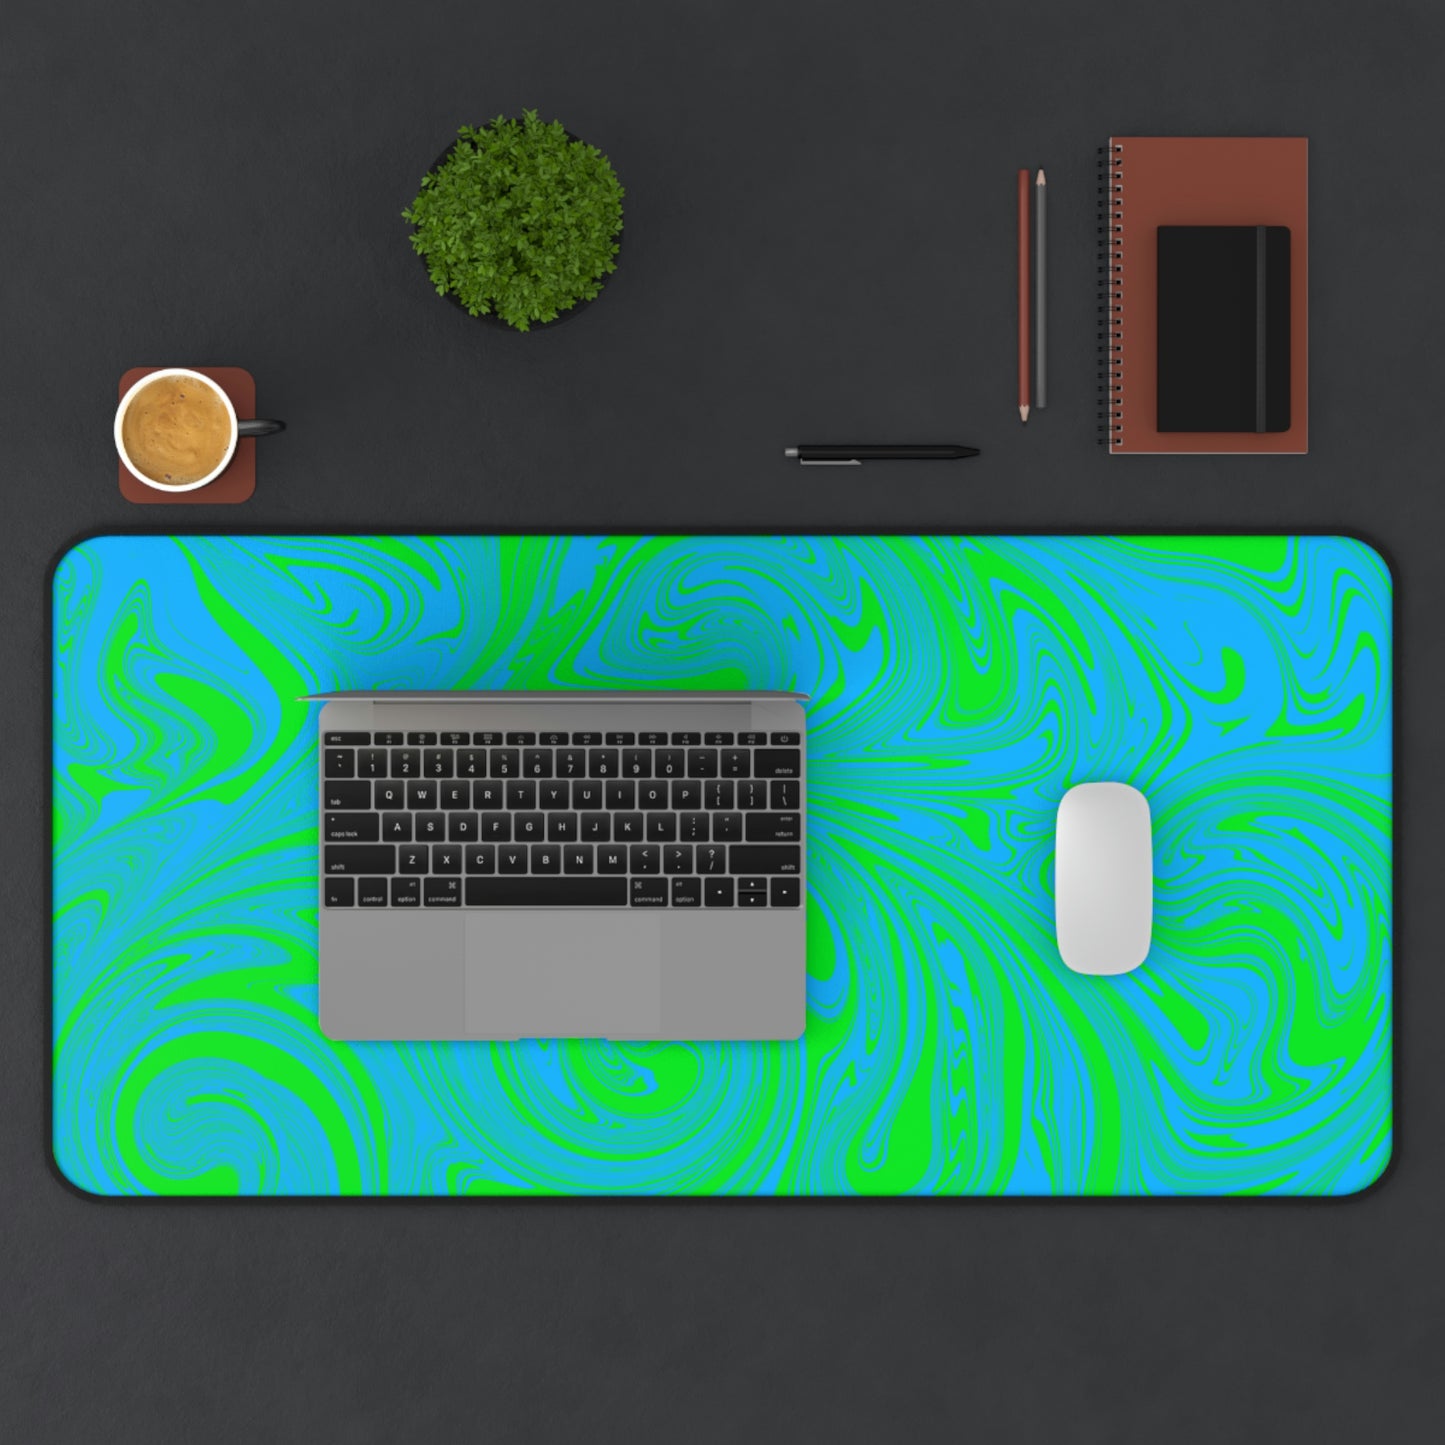 A 31" x 15.5" desk mat with blue and green swirls. A laptop and mouse sit on top of it.